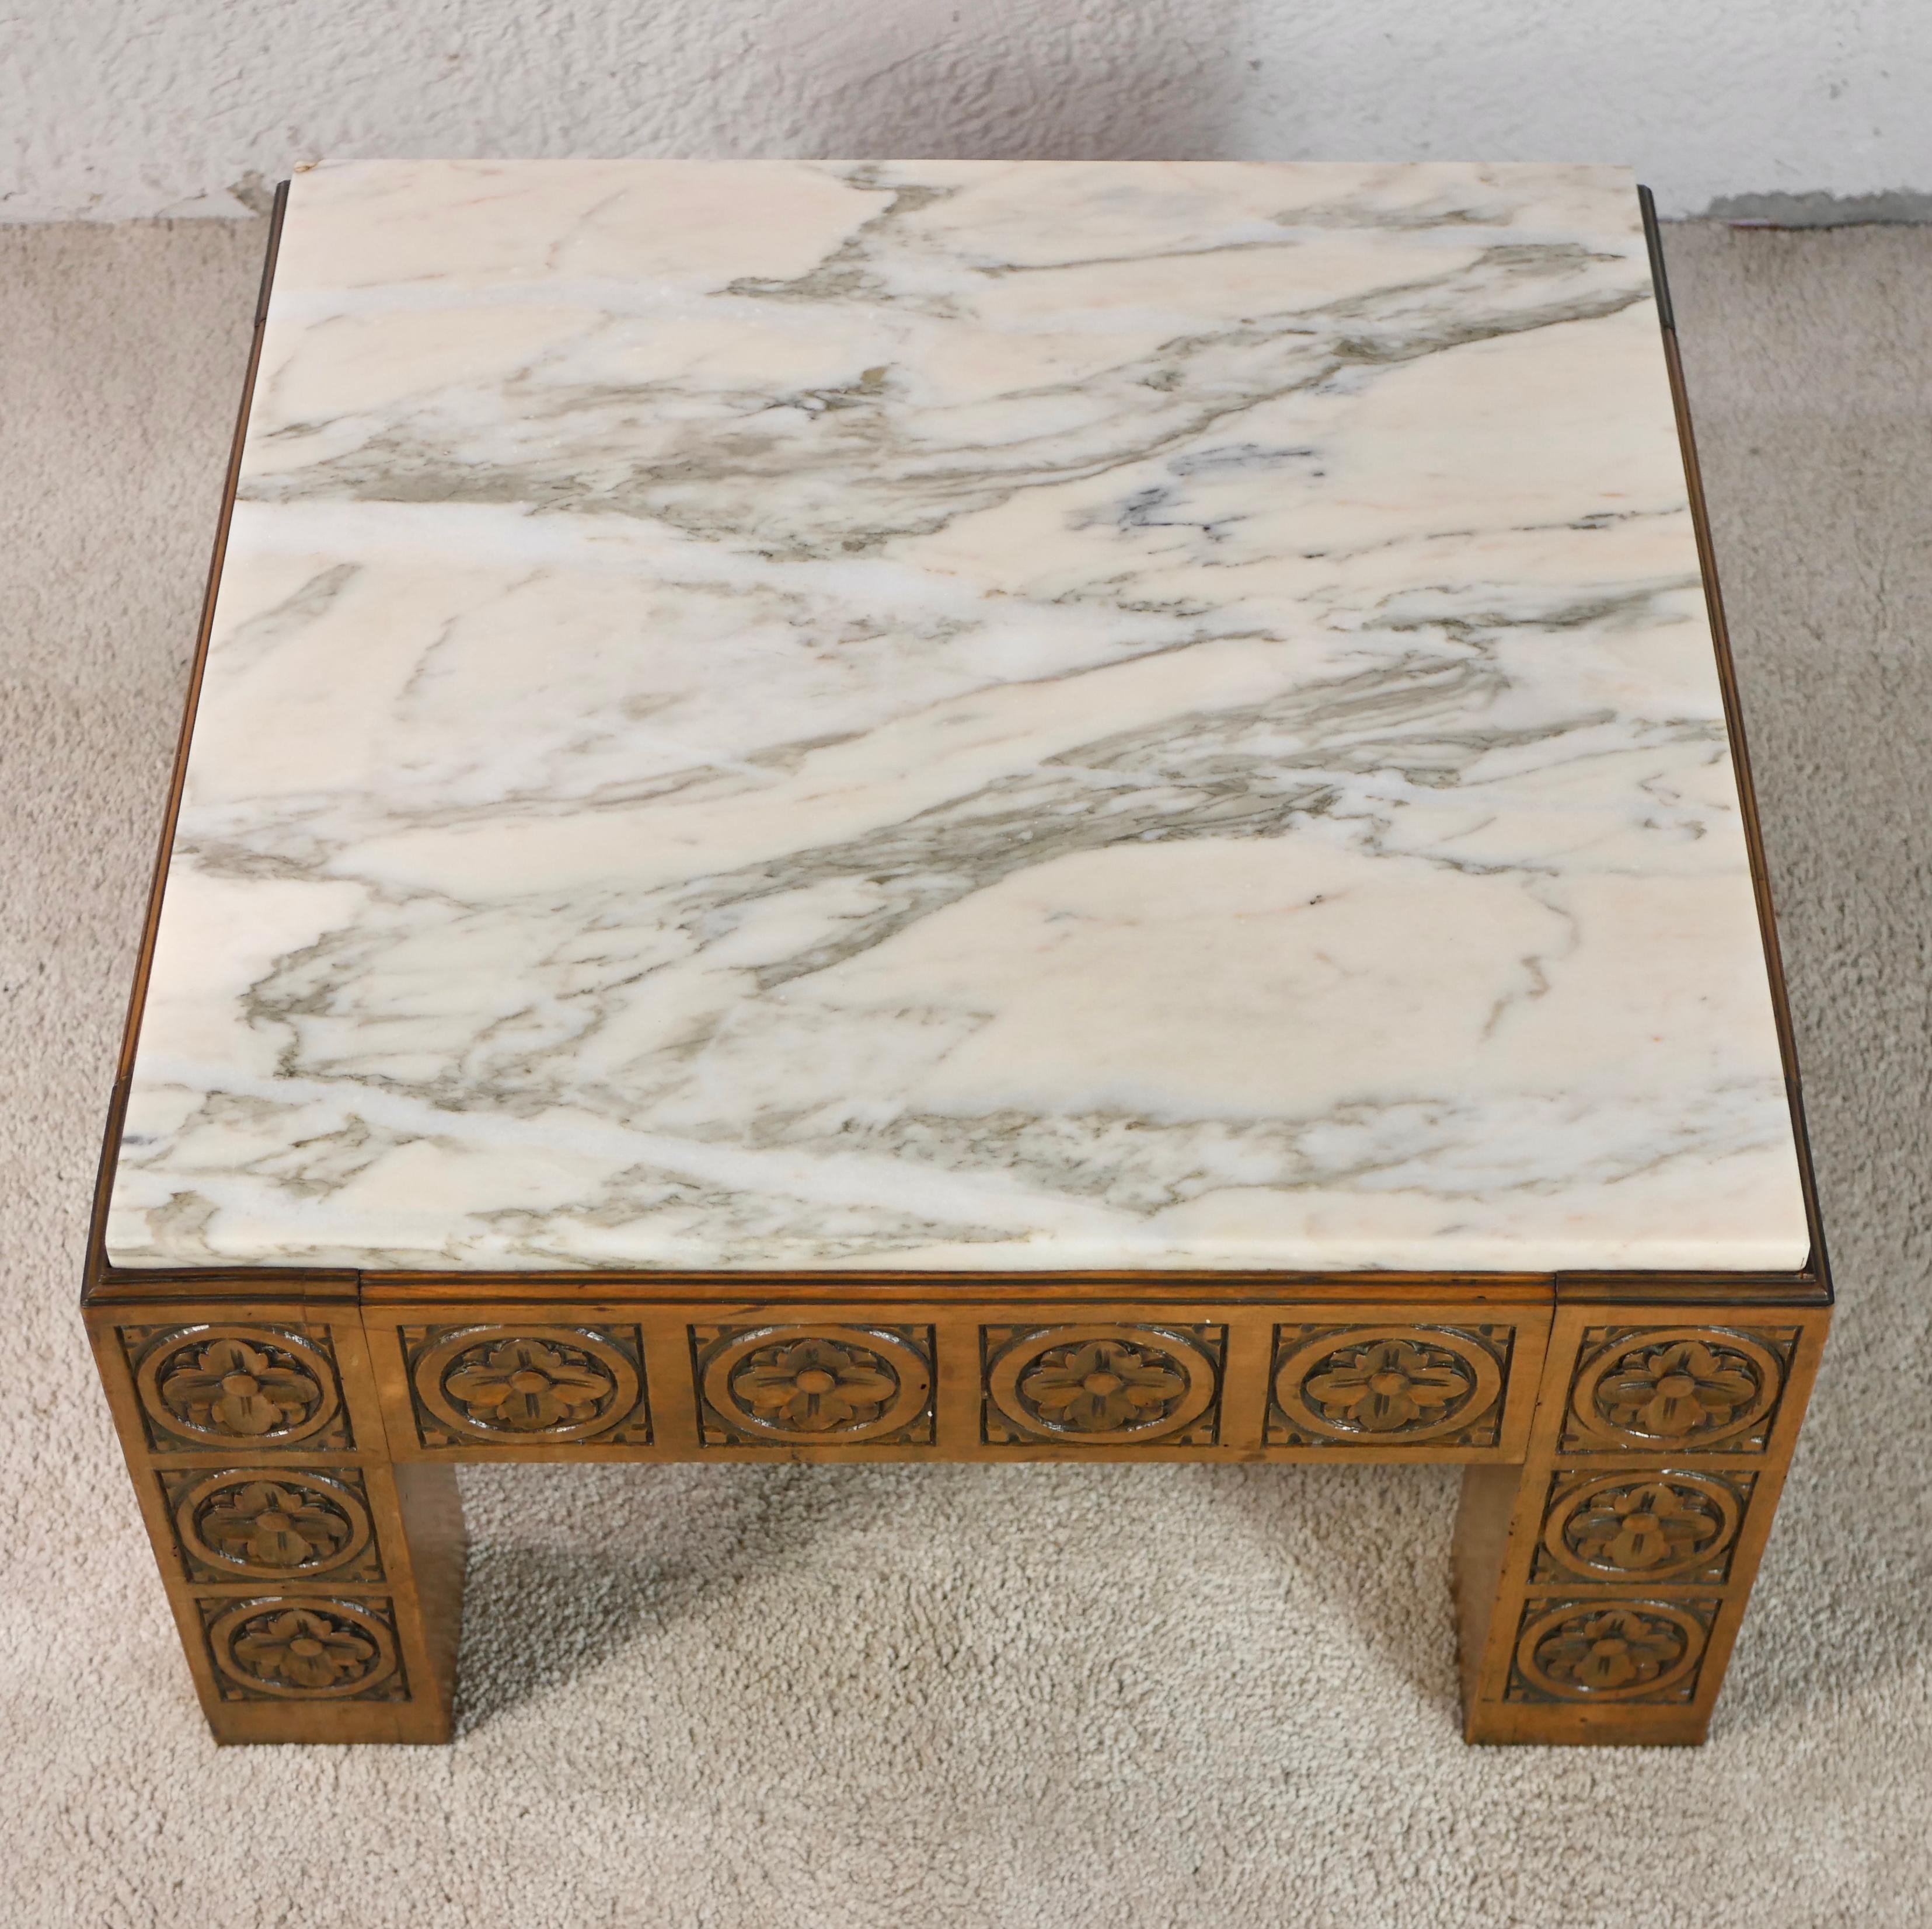 Spanish Midcentury Carved Wood and Marble Square Coffee Table from Spain